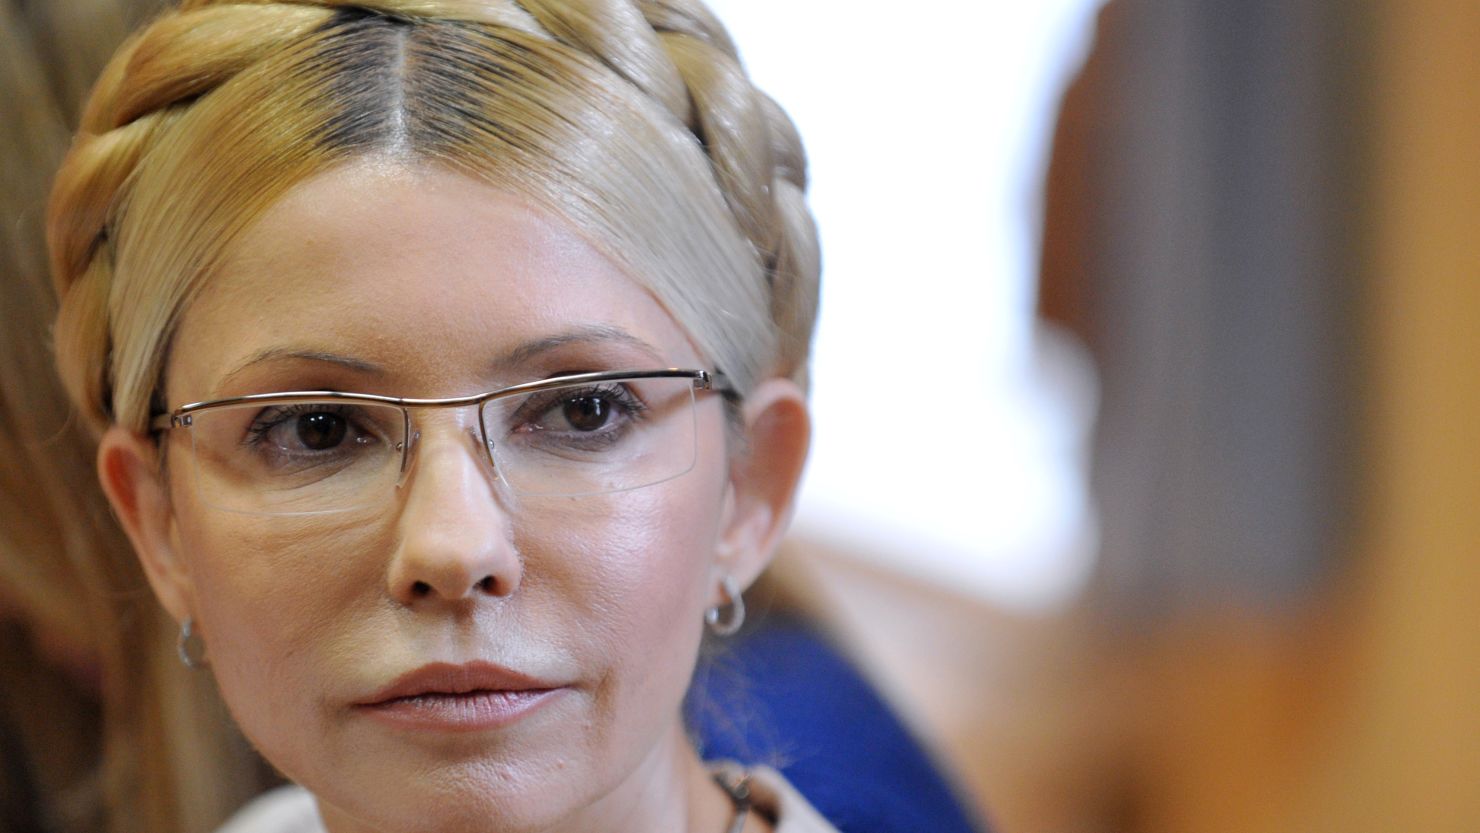 Yulia Tymoshenko, Former Ukrainian prime minister, said she had been on a hunger strike after being beaten in prison.